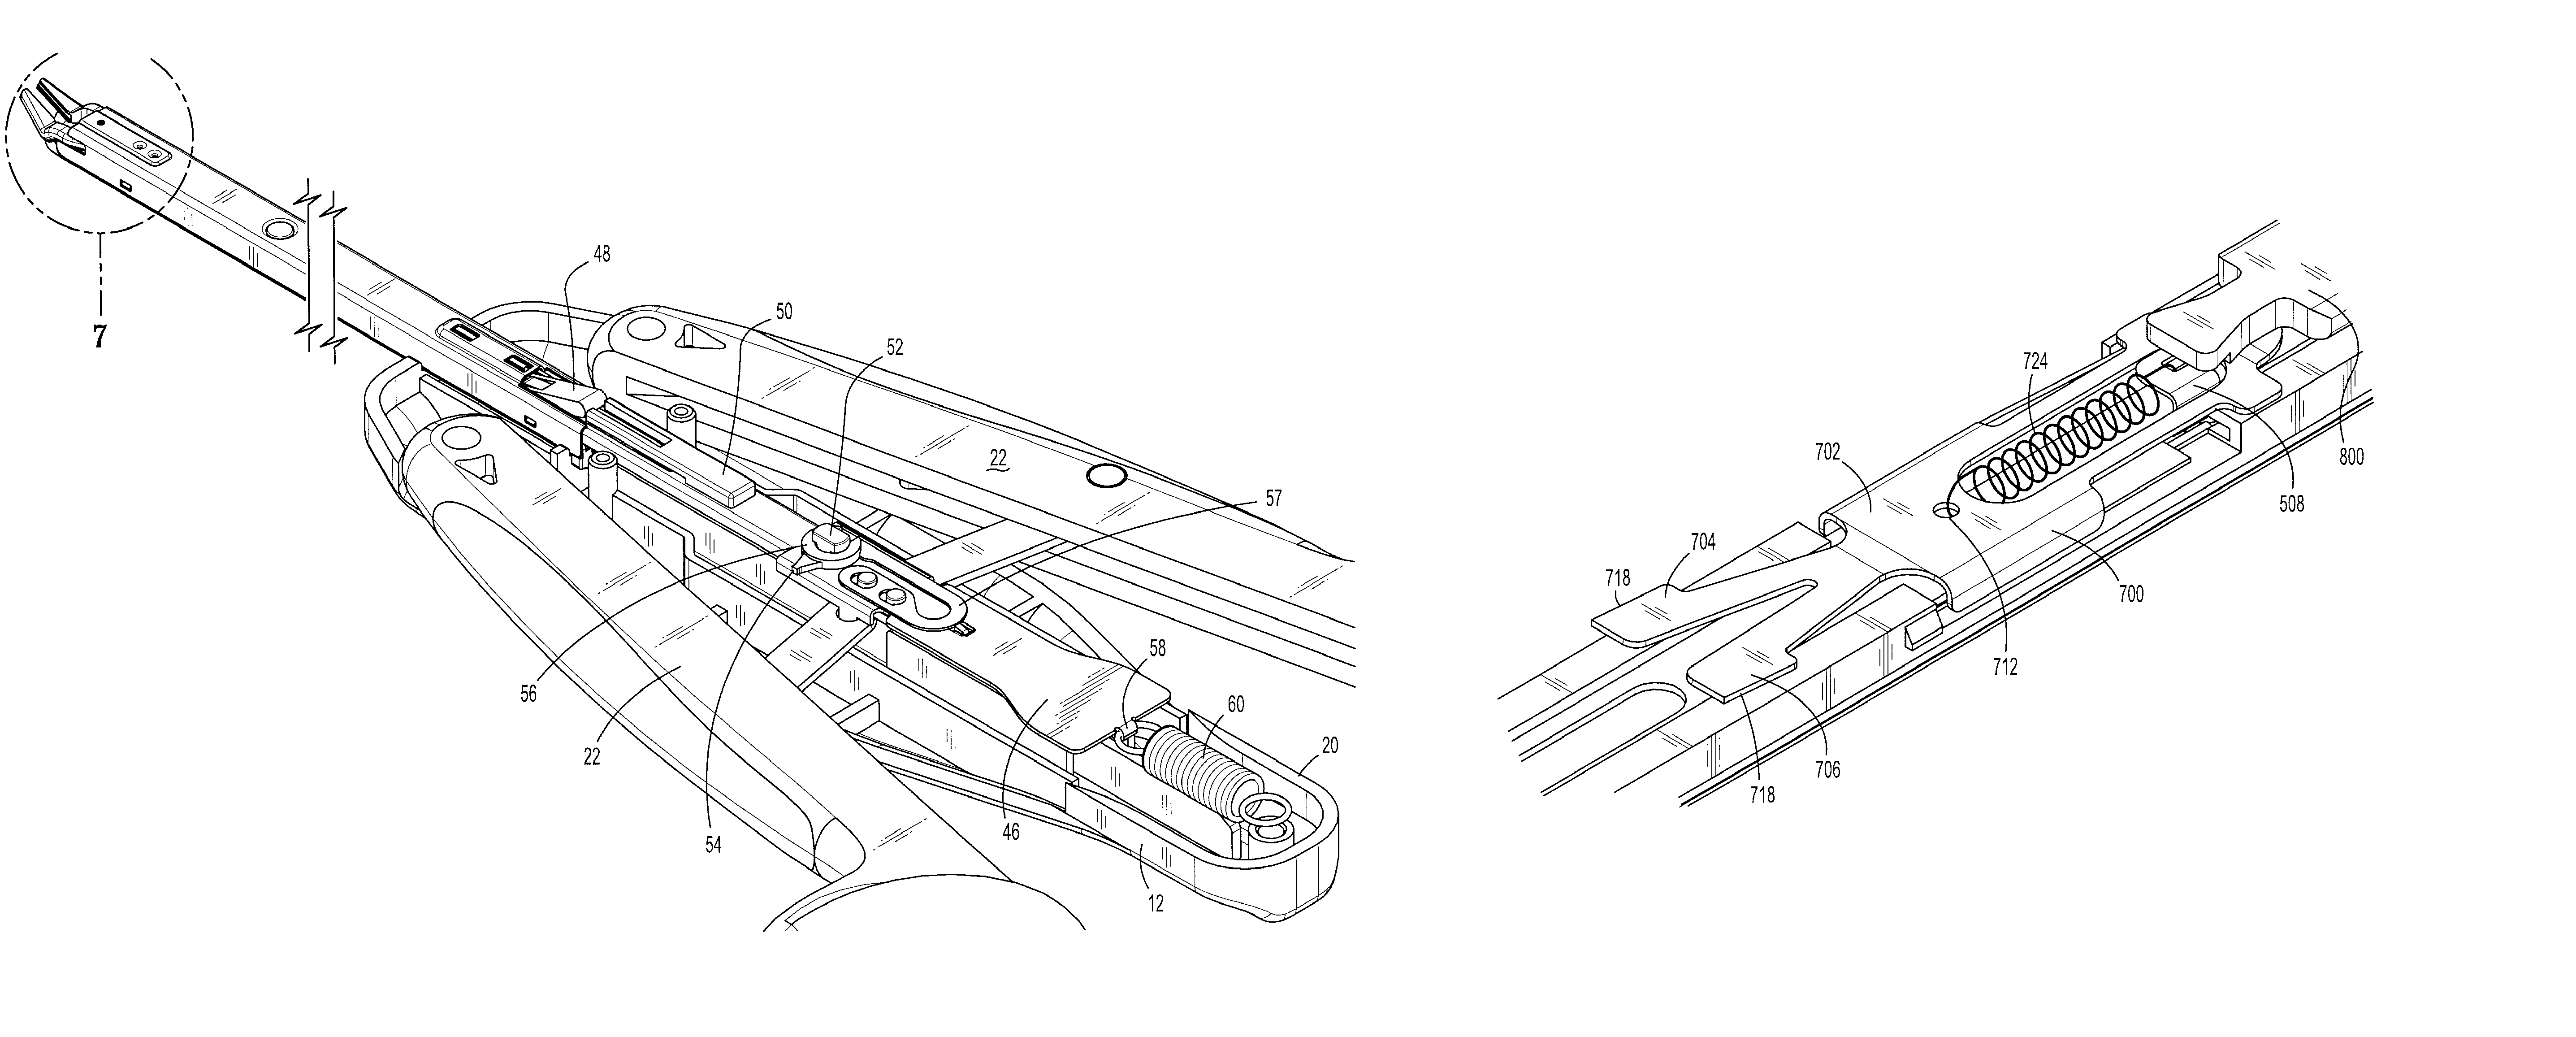 Apparatus for applying surgical clips